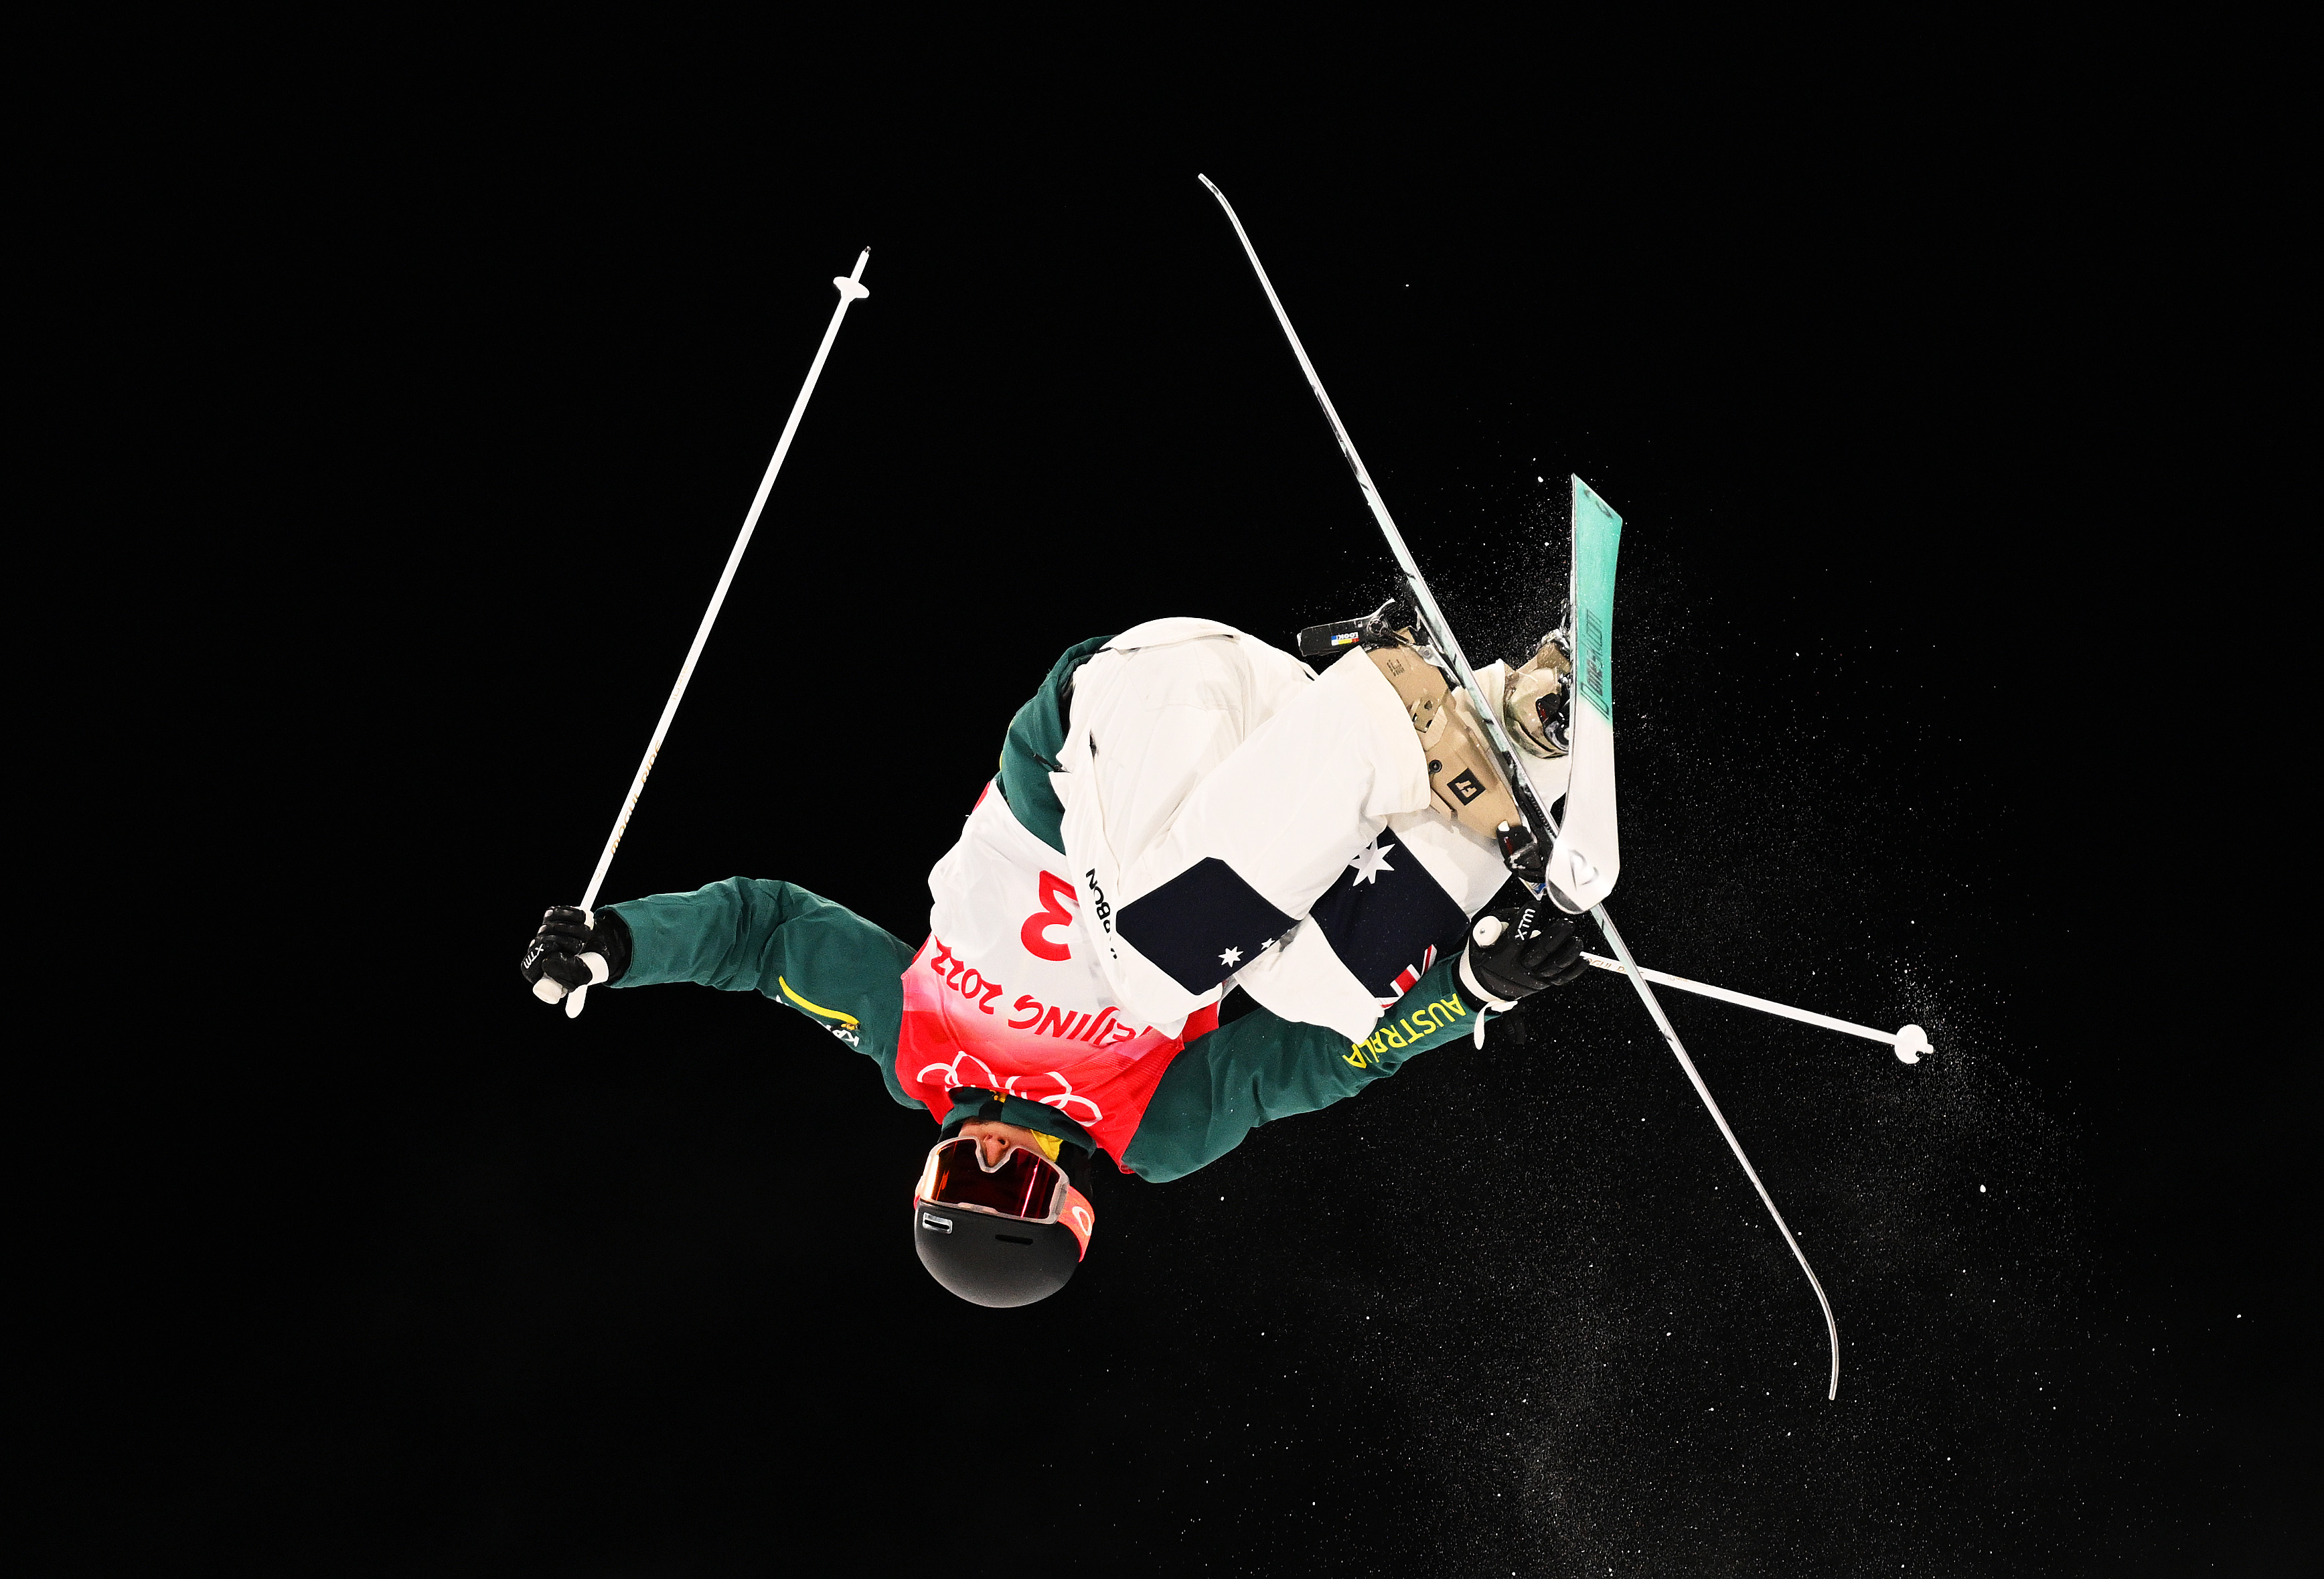 Jakara Anthony jumps during the women’s freestyle moguls competition in Beijing.